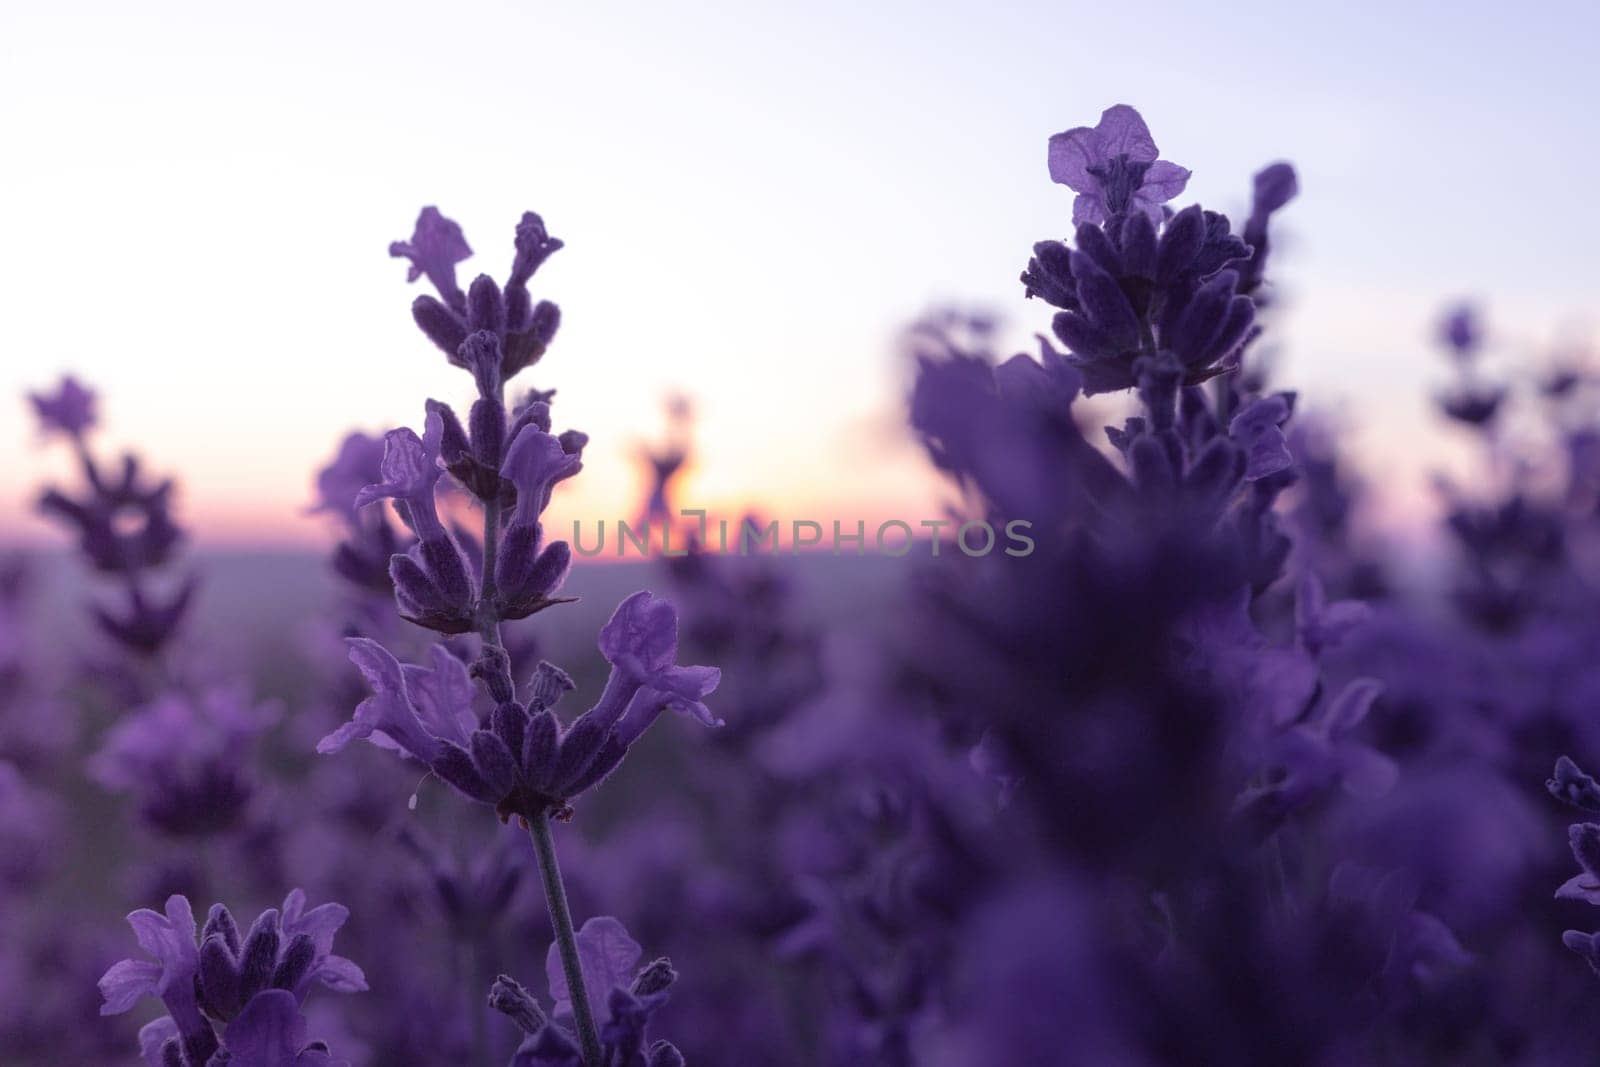 Lavender flower field closeup, fresh purple aromatic flowers for natural background. Violet lavender field in Provence, France.